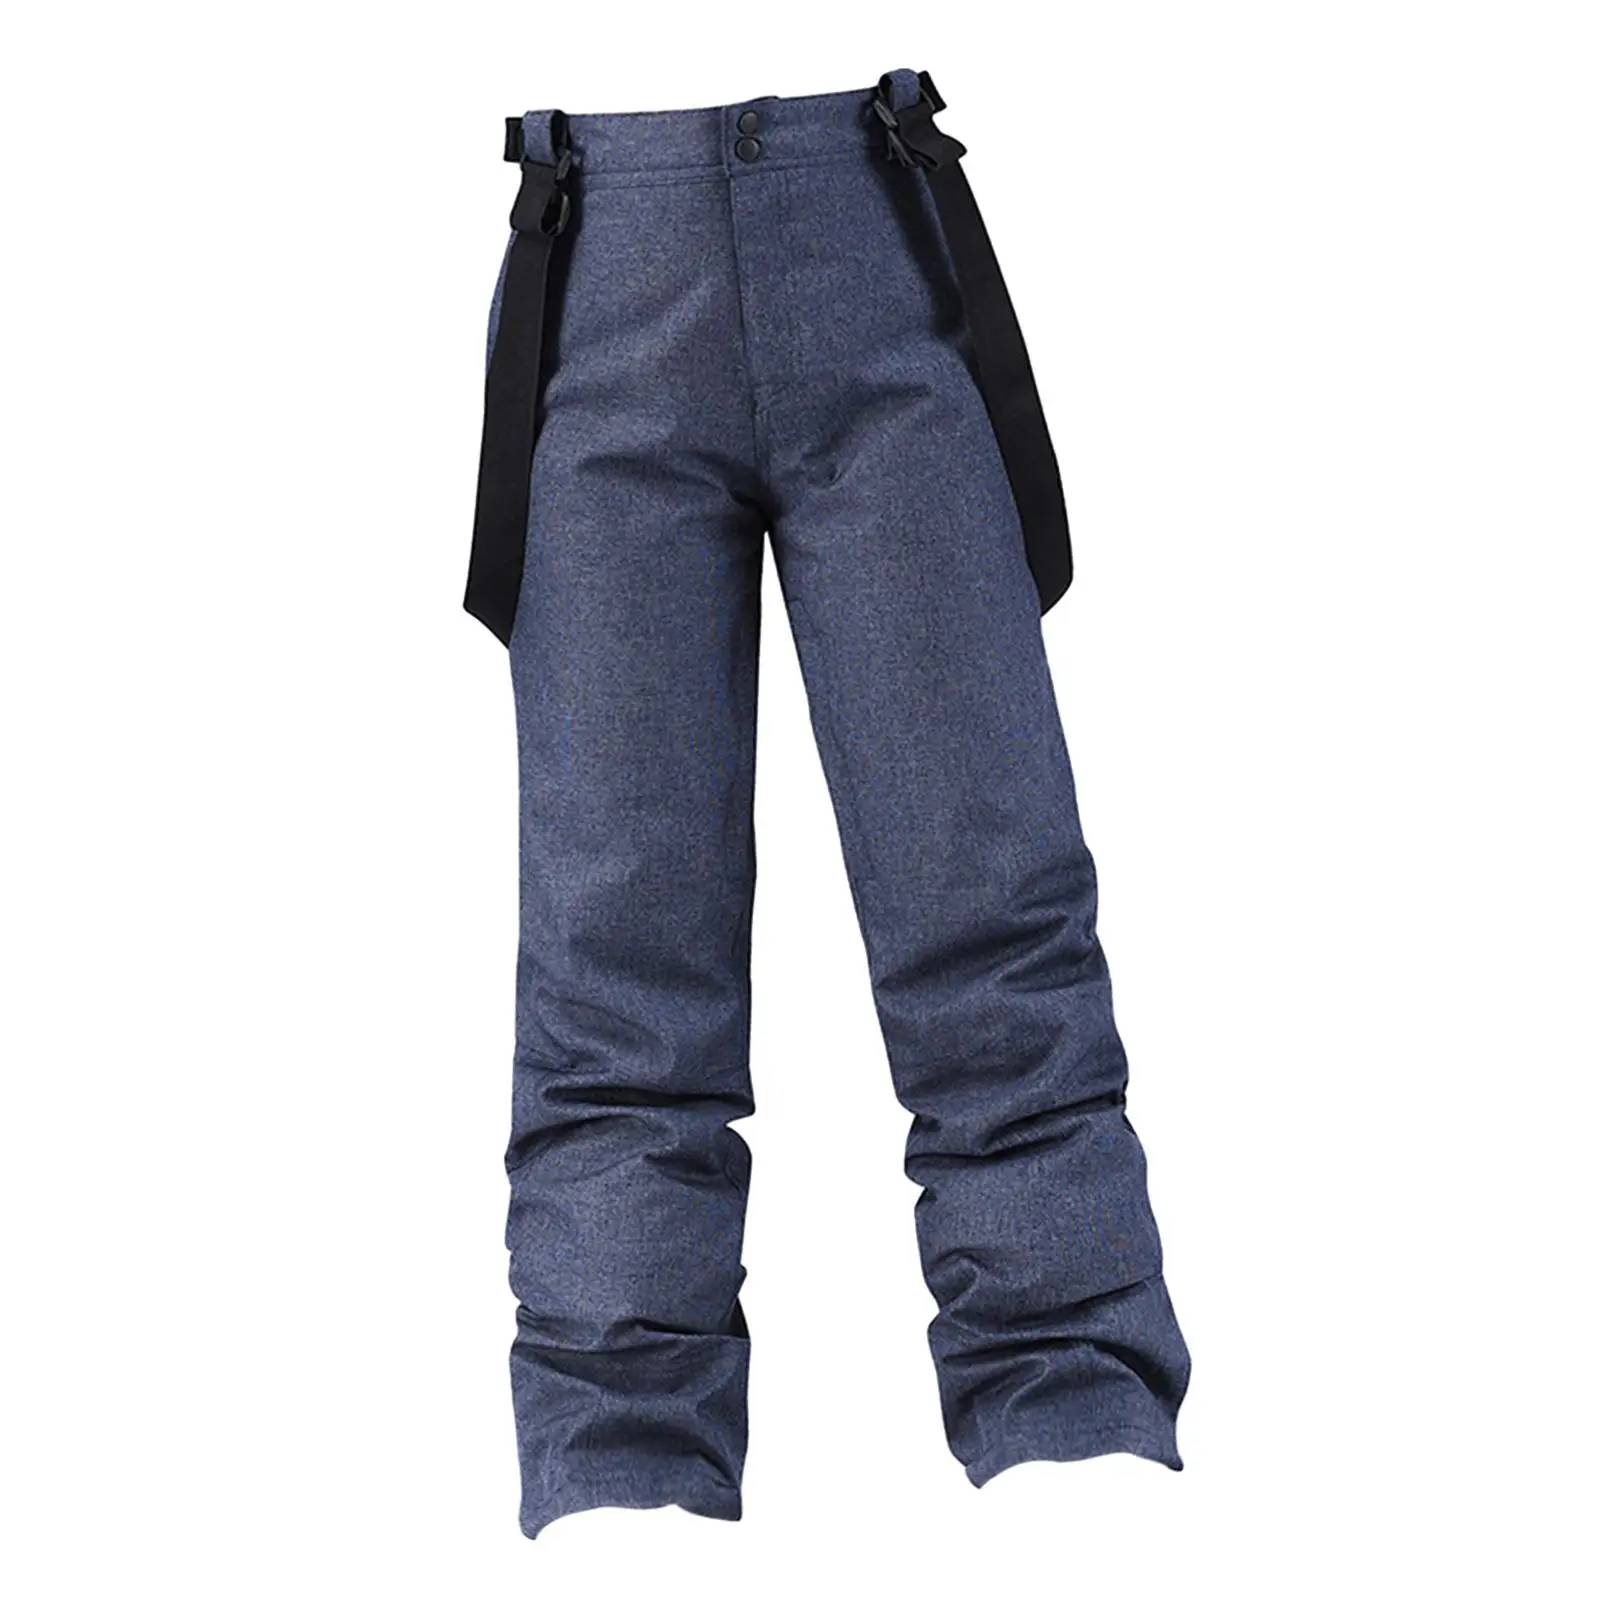 Snow Ski Pants Warm Insulated Windproof Unisex Full Length Outdoor Winter